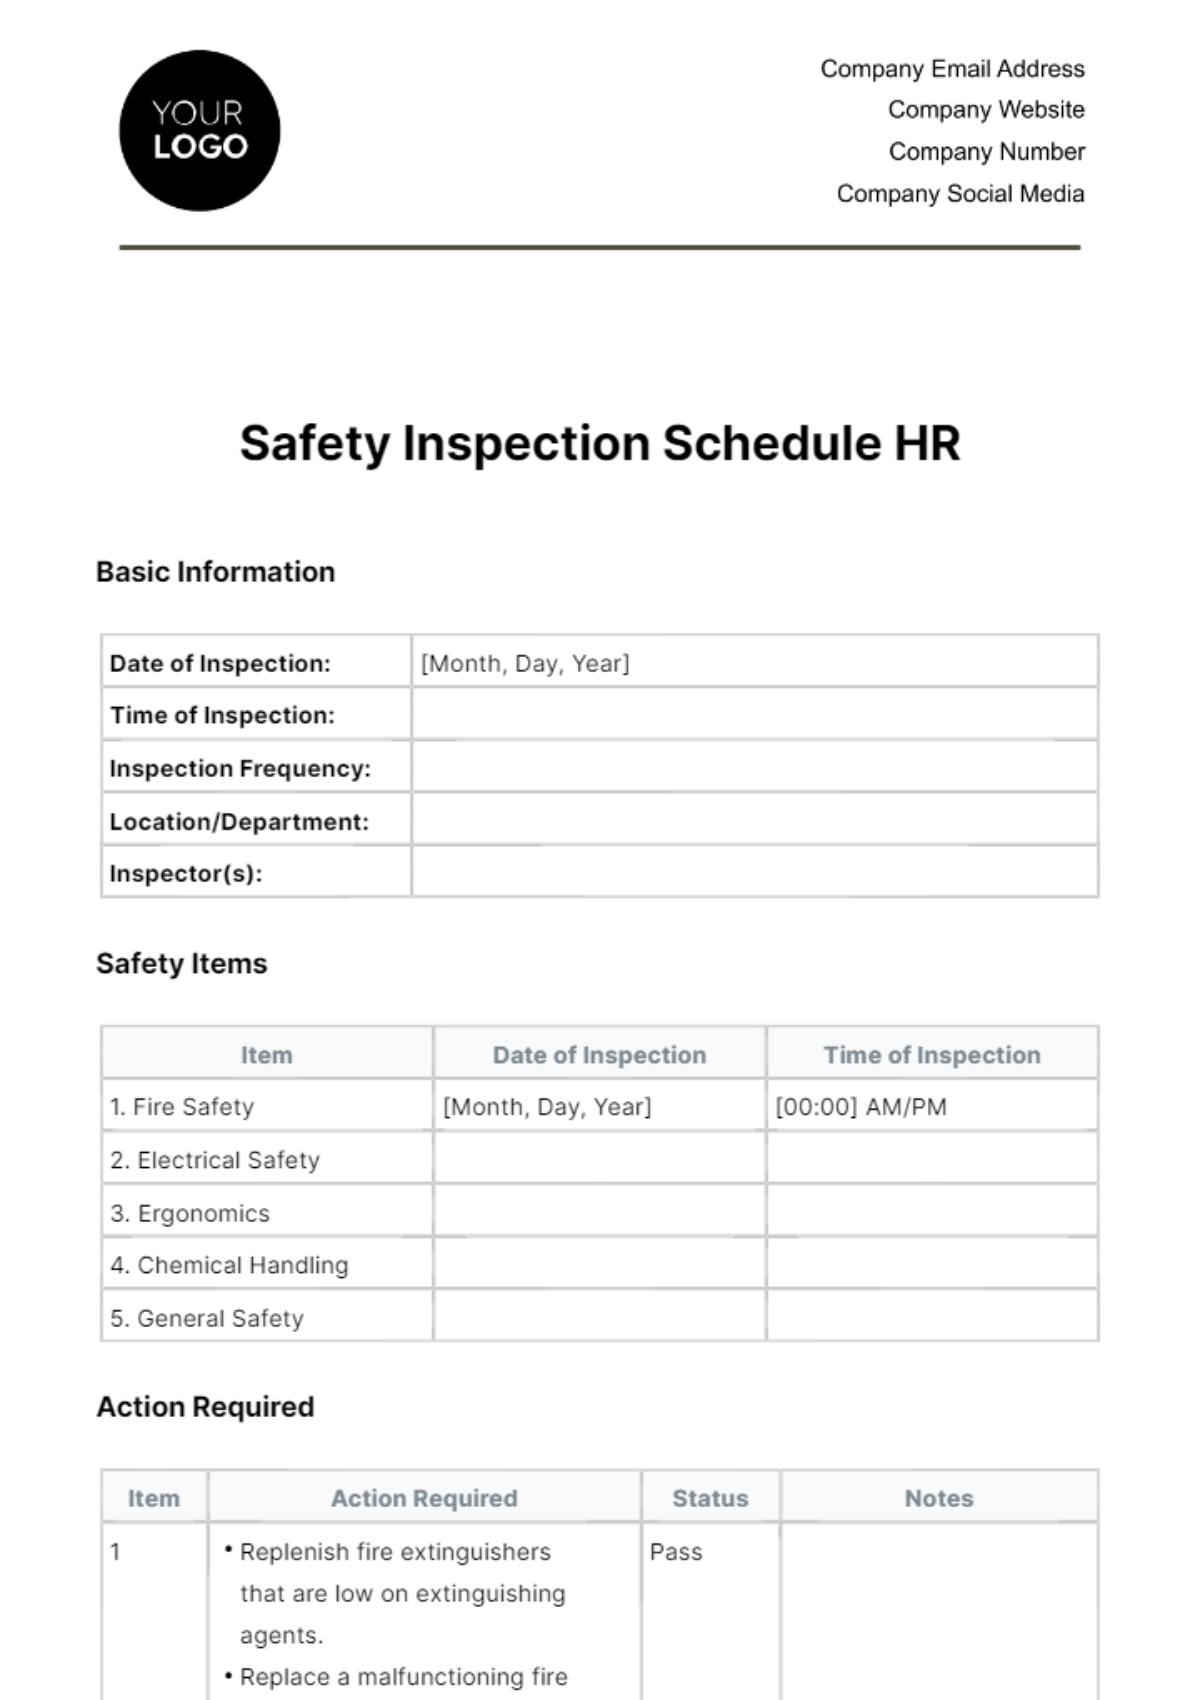 Free Safety Inspection Schedule HR Template